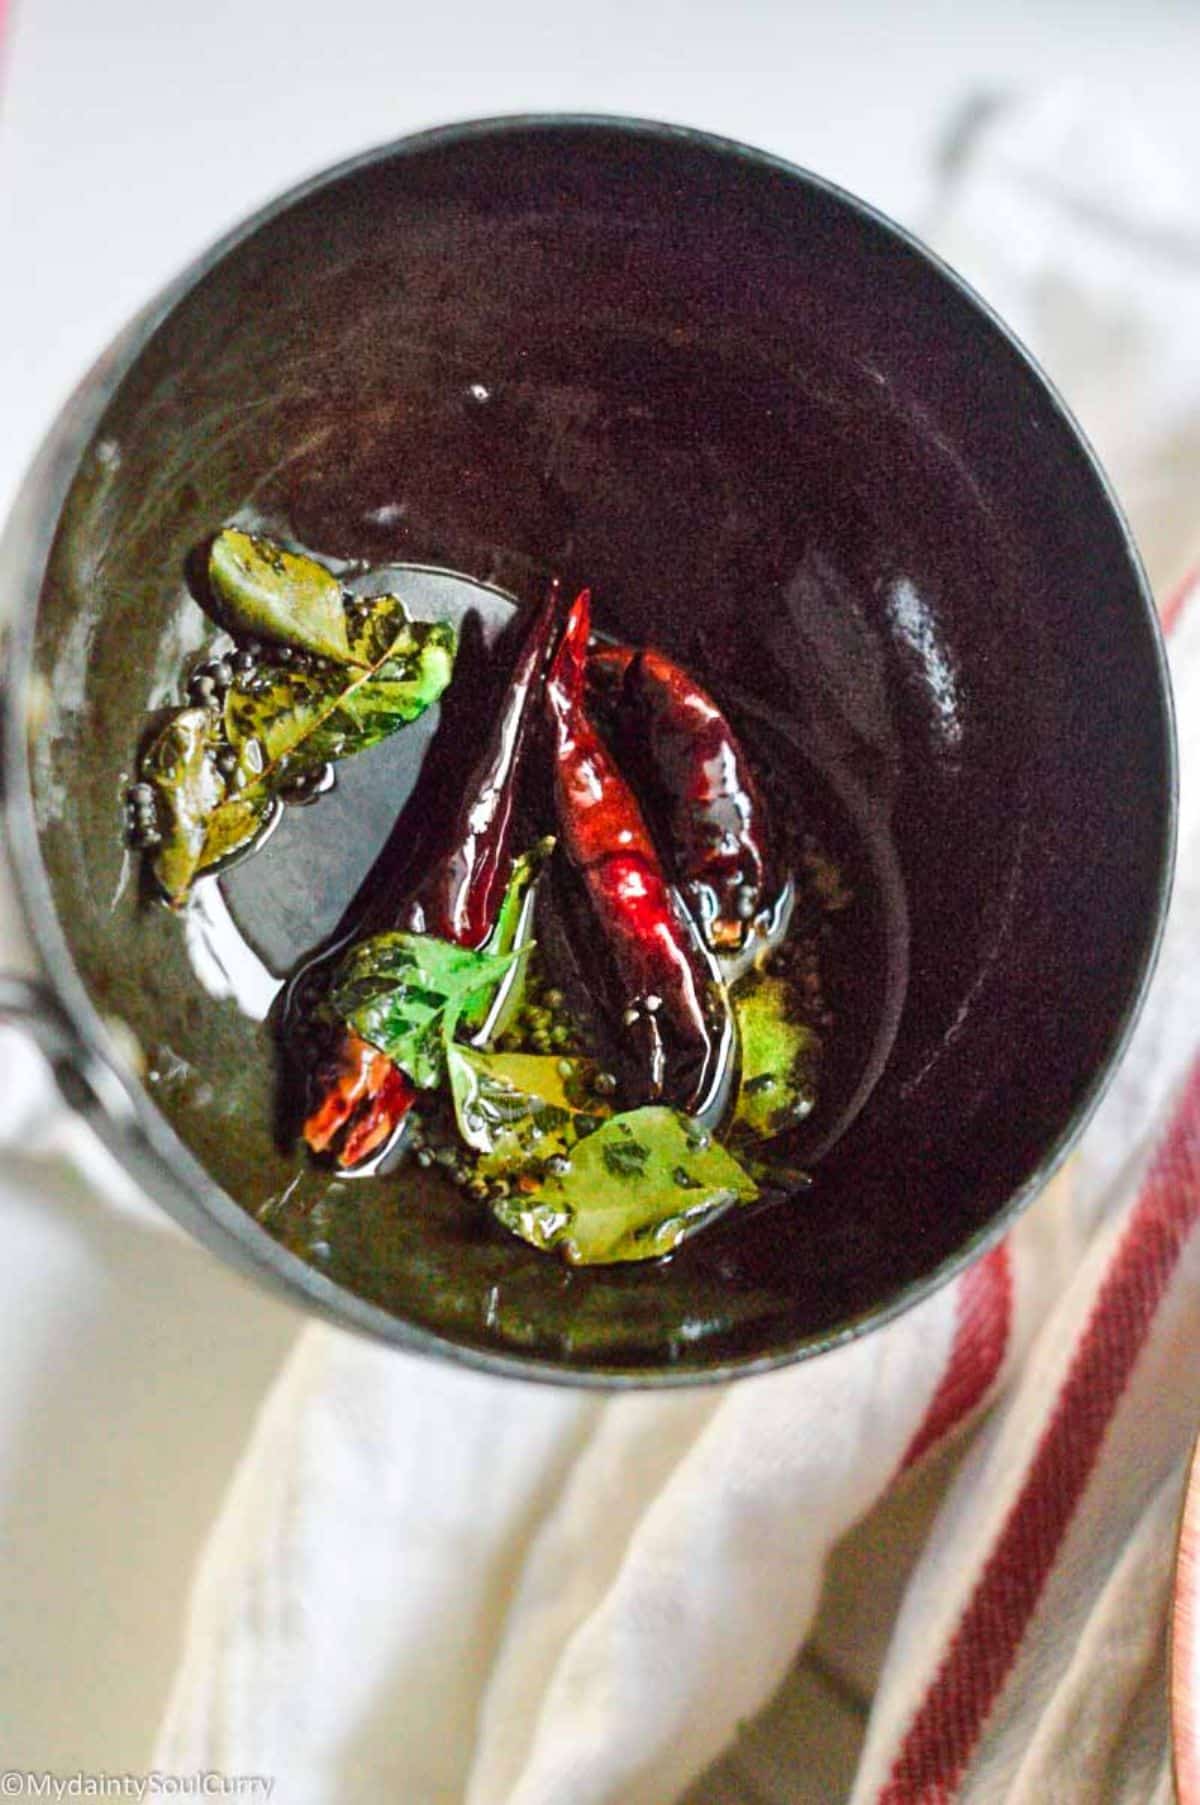 A black bowl with chili peppers.